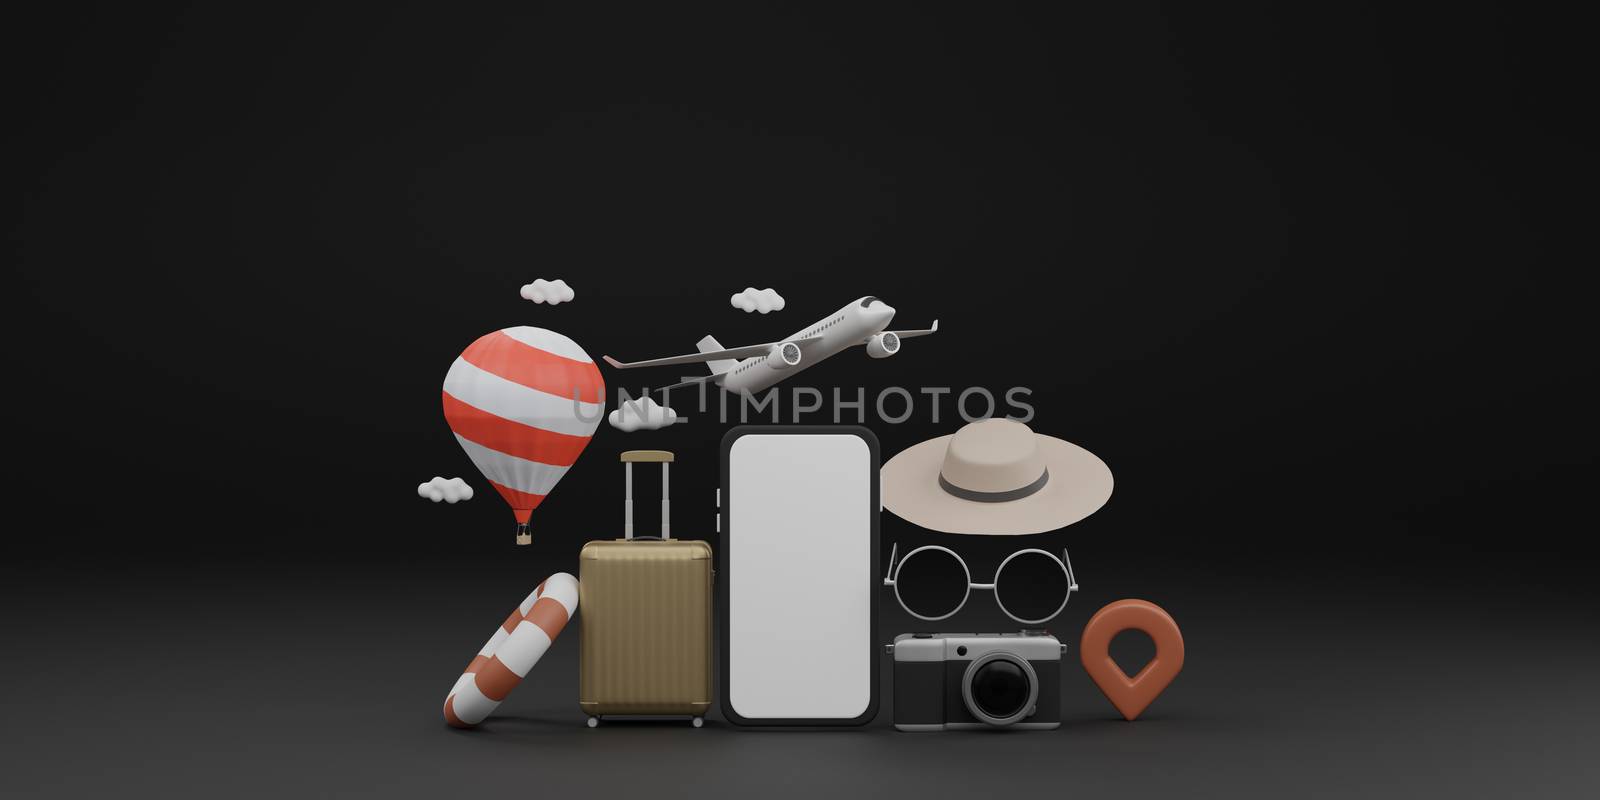 white screen mobile mockup with airplane, balloon, swimming rubber ring, luggage, sunglasses, hat and camera over black background travel concept. 3d rendering